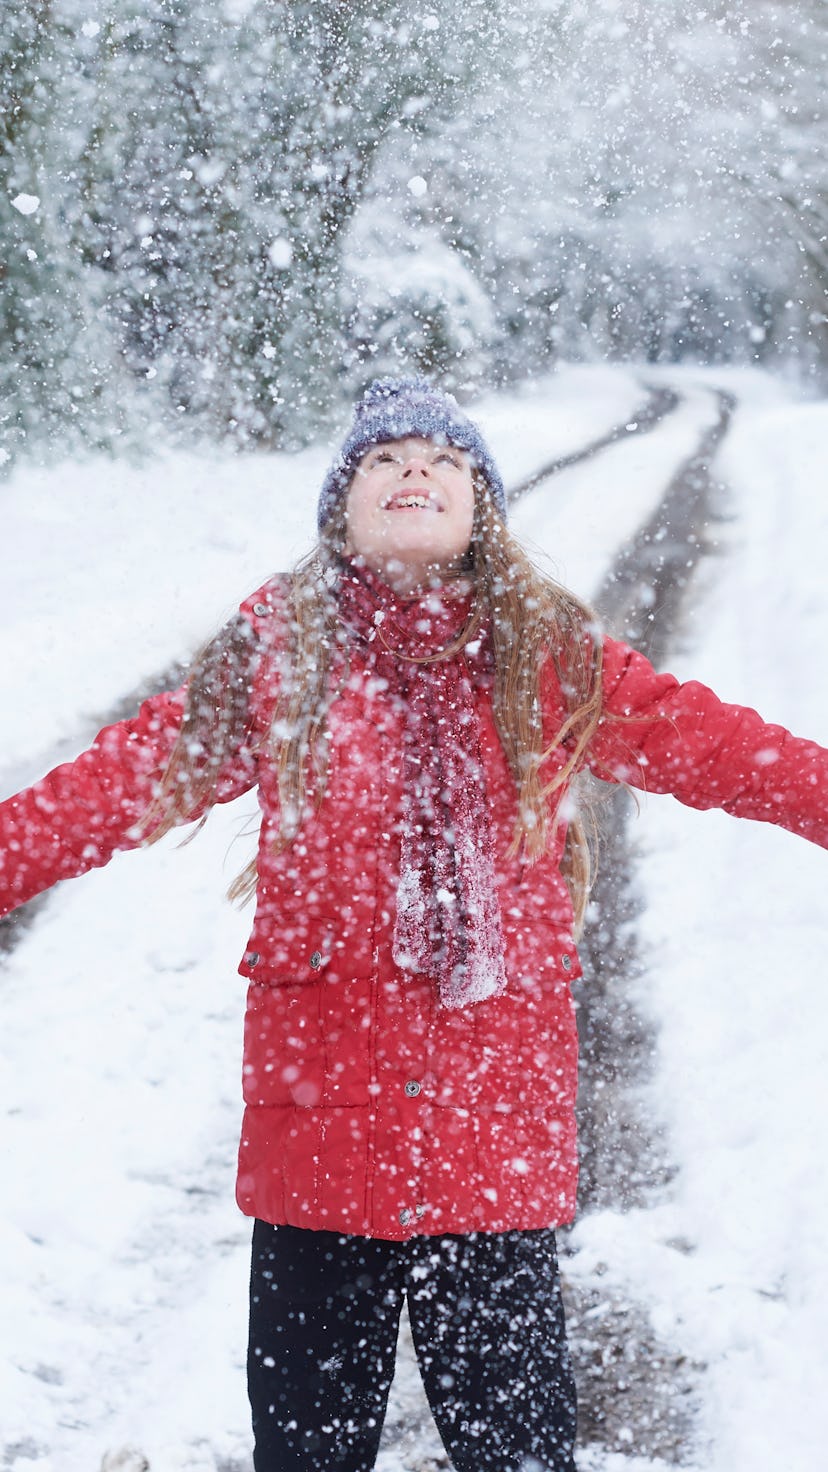 A girl in a red jacket looking up at snow falling with arms wide open